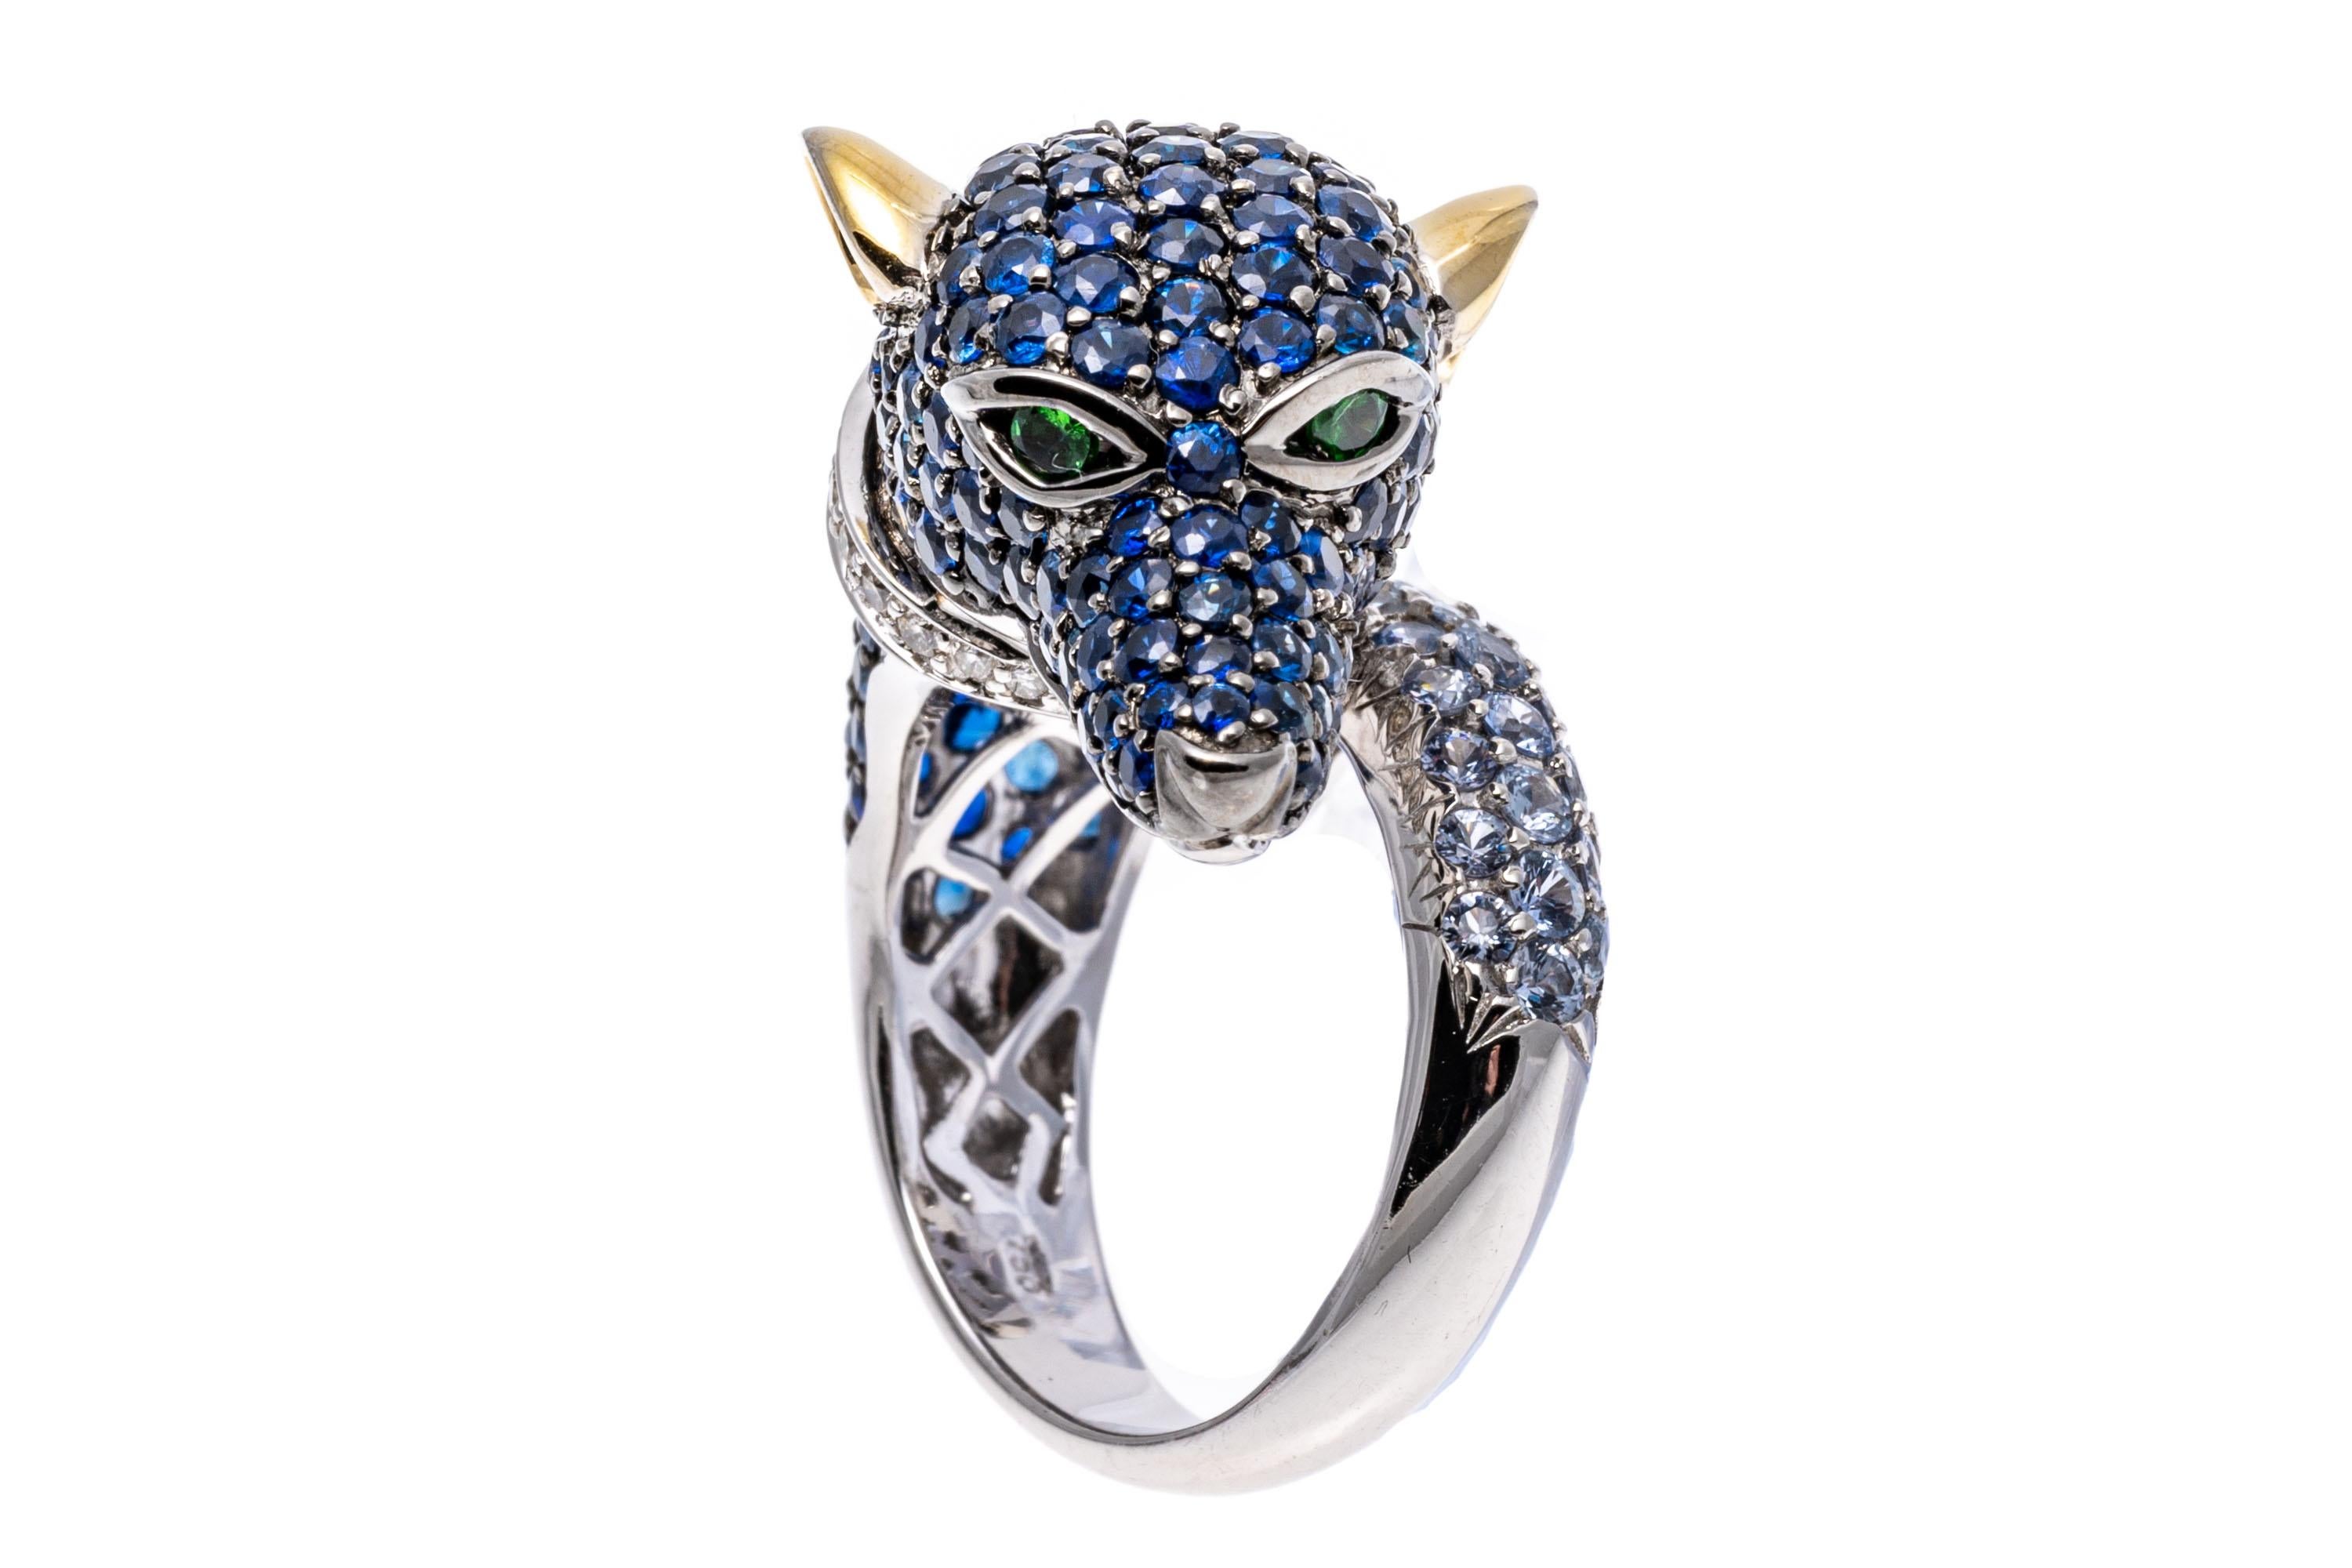 Round Cut 18k White Gold Pave Set Sapphire, Diamond And Tsavorite Dog Ring, Size 7.25 For Sale